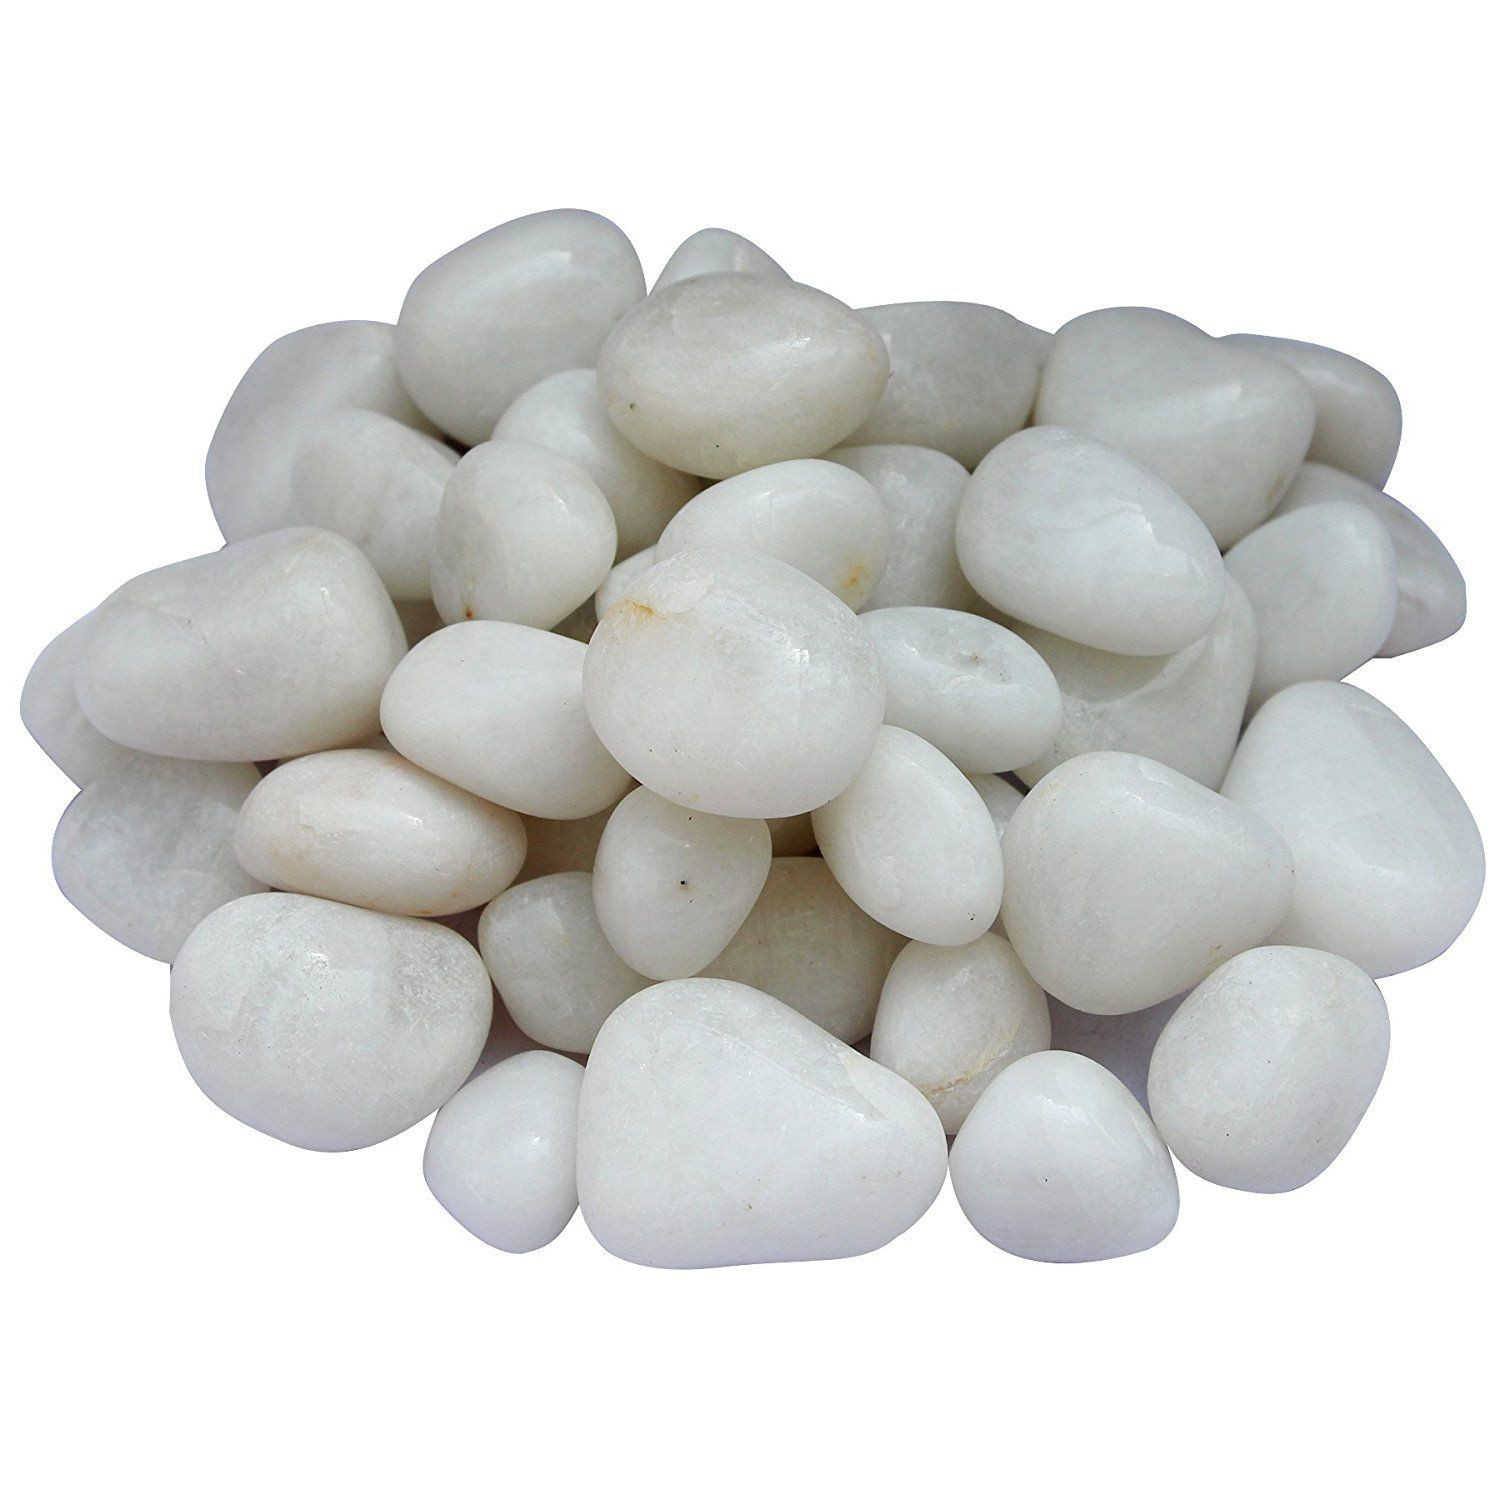 pottery barn sea glass vase filler of 27 fall vase fillers the weekly world with itos365 pebbles glossy home decorative vase fillers white stone 1